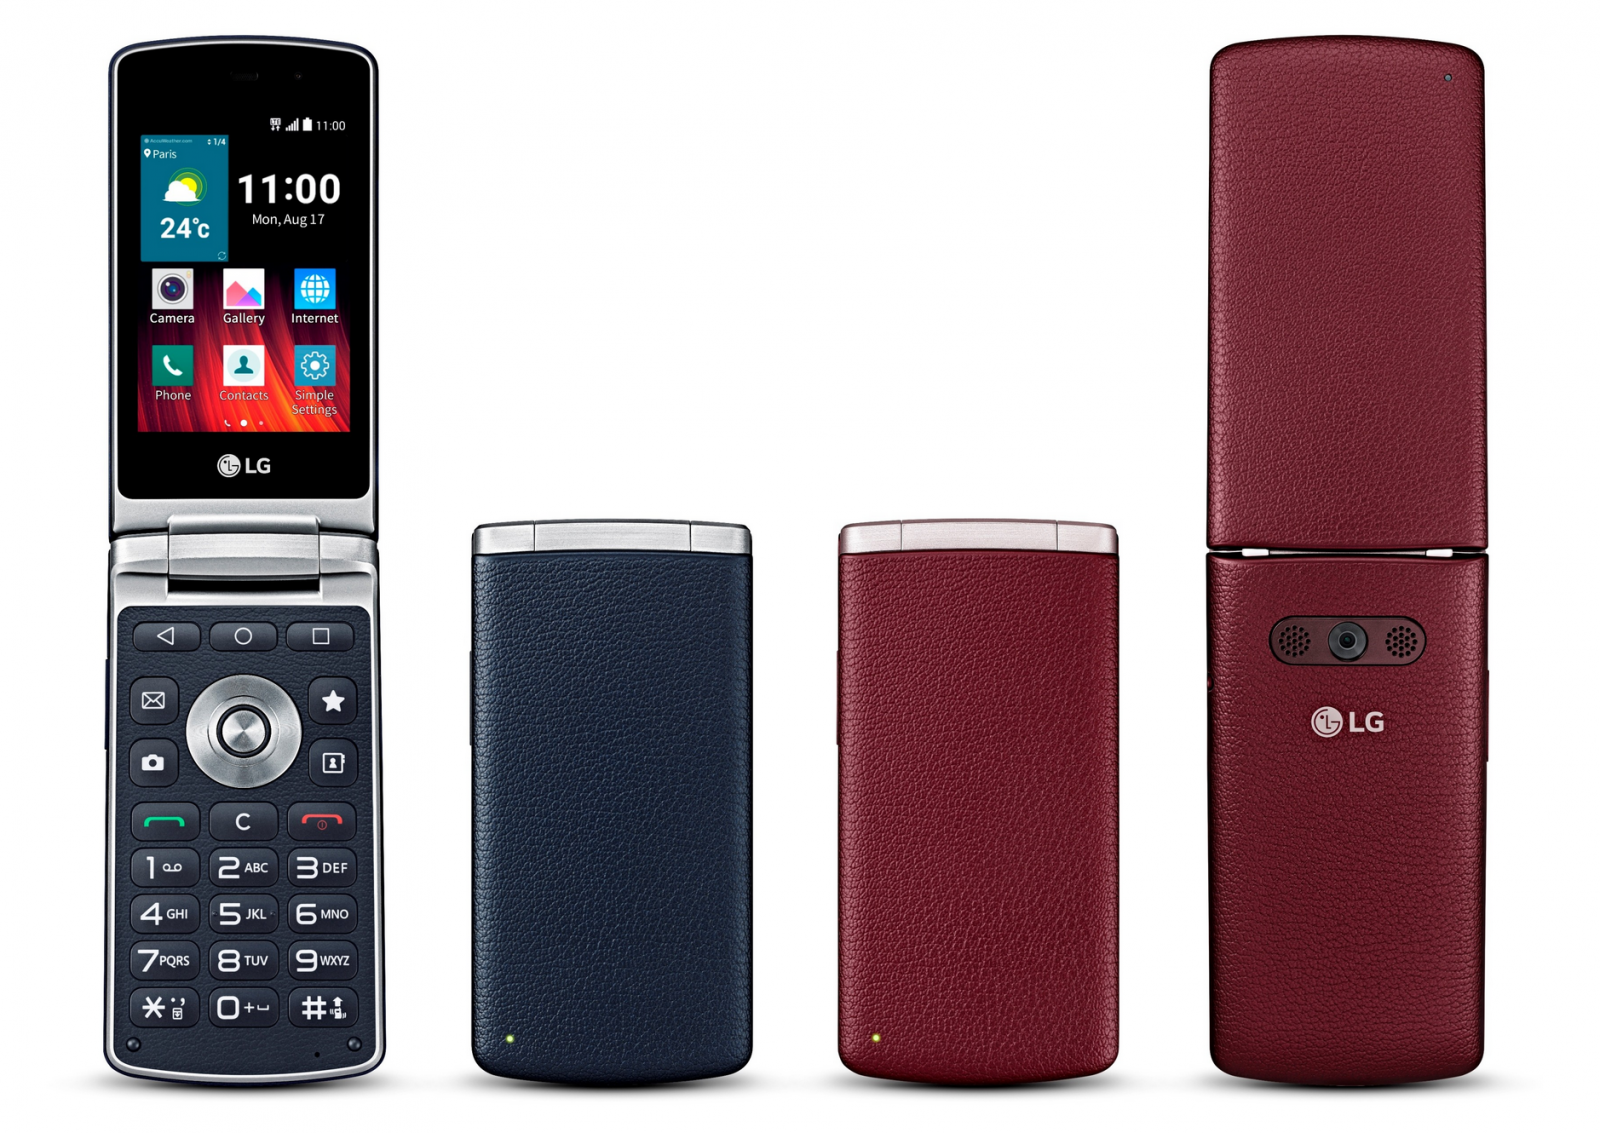 Flip phone is back LG Wine Smart retro Android smartphone launches in UK